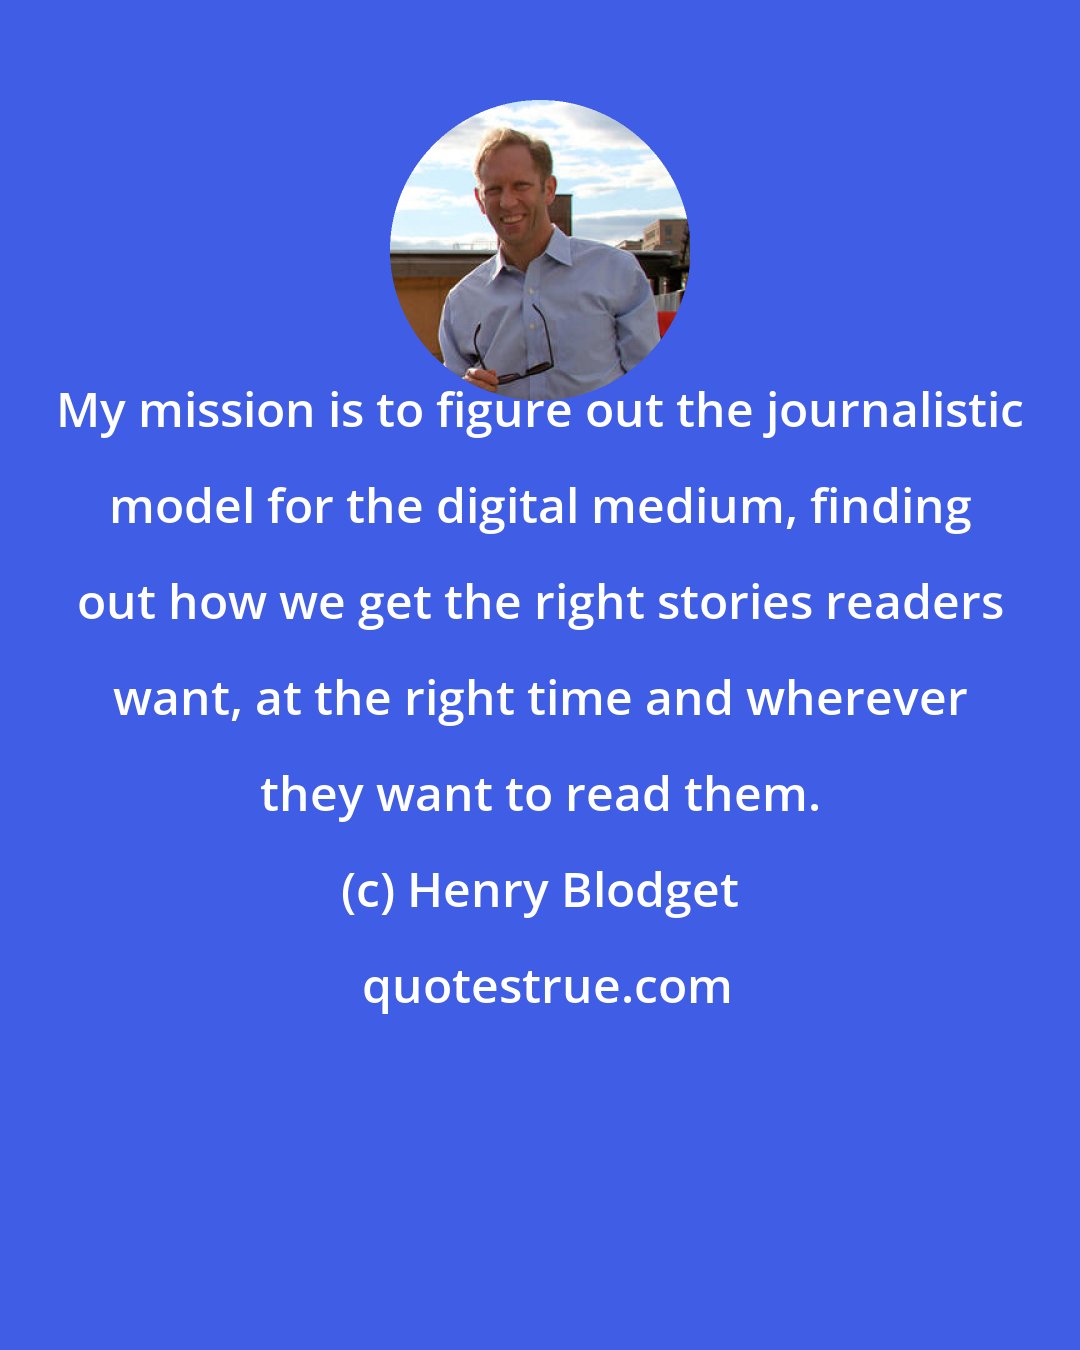 Henry Blodget: My mission is to figure out the journalistic model for the digital medium, finding out how we get the right stories readers want, at the right time and wherever they want to read them.